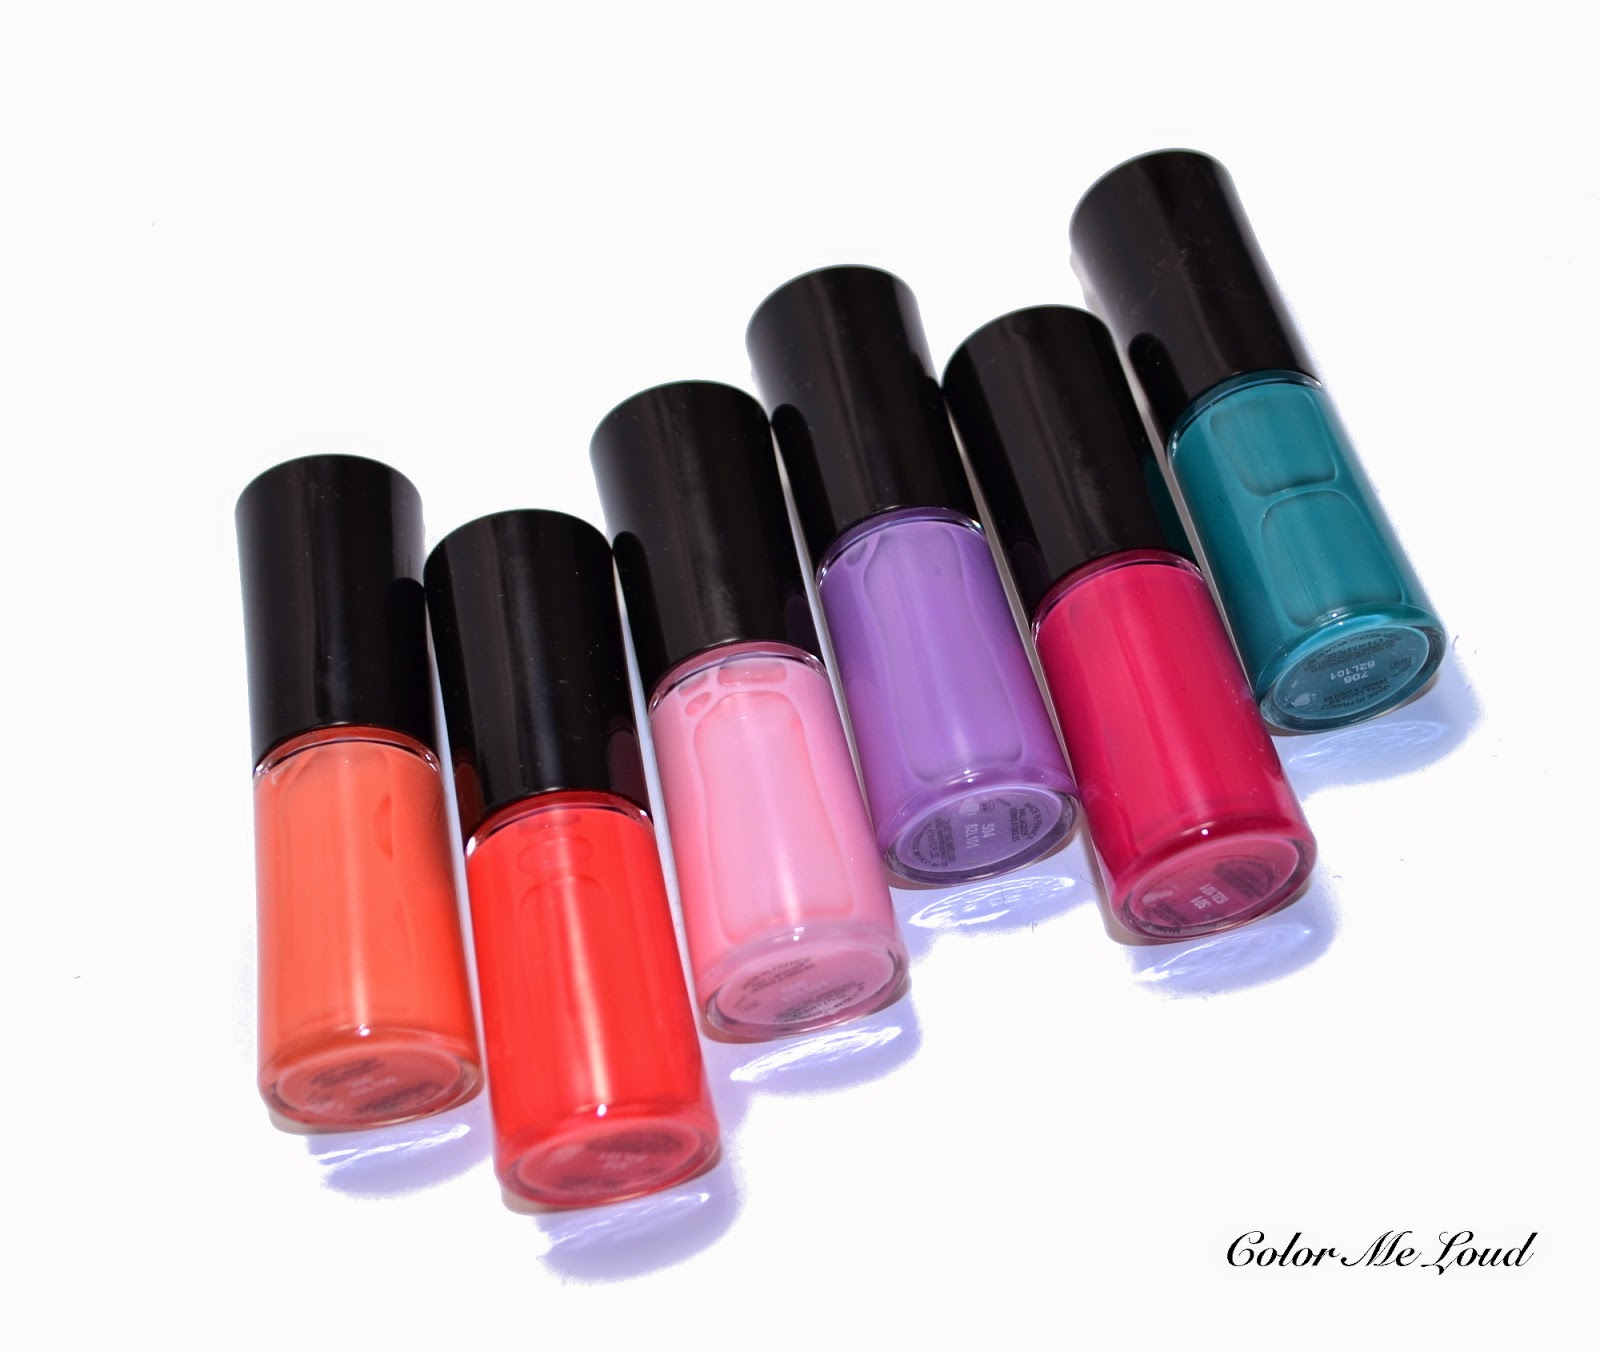 Giorgio Armani Nail Lacquer #300 Pistil, #302 Corallo, #500 Cherryblossom, #501 Bougainville, #504 Lilas and #706 Turquoise from Bright Ribbon Collection for Summer 2014, Review & Swatches